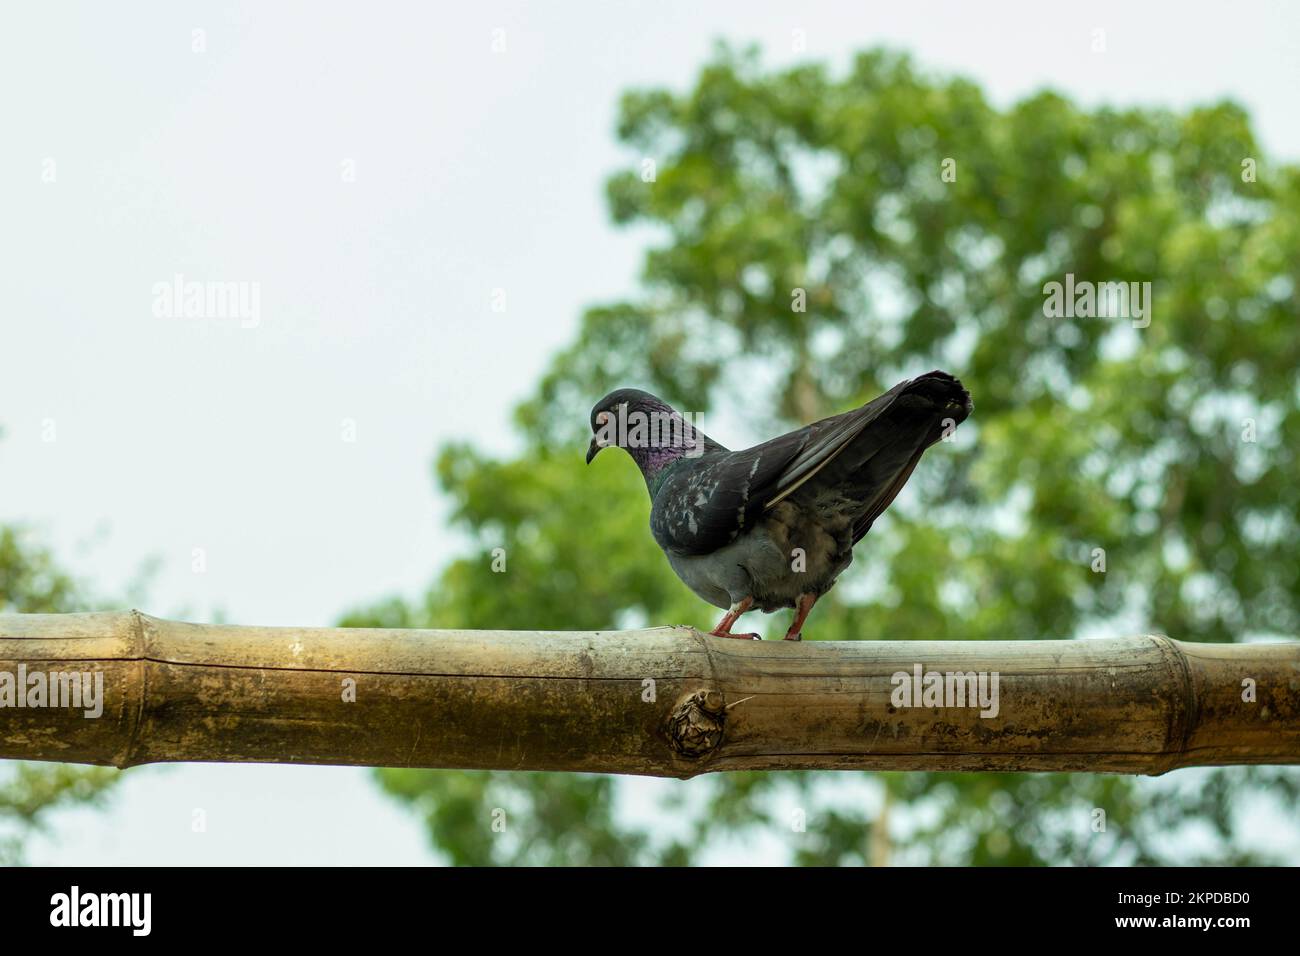 Pigeons are sitting on dry bamboo. Pigeons have round bodies, short necks, and small beaks. These common birds are related to doves. Their feathers ar Stock Photo